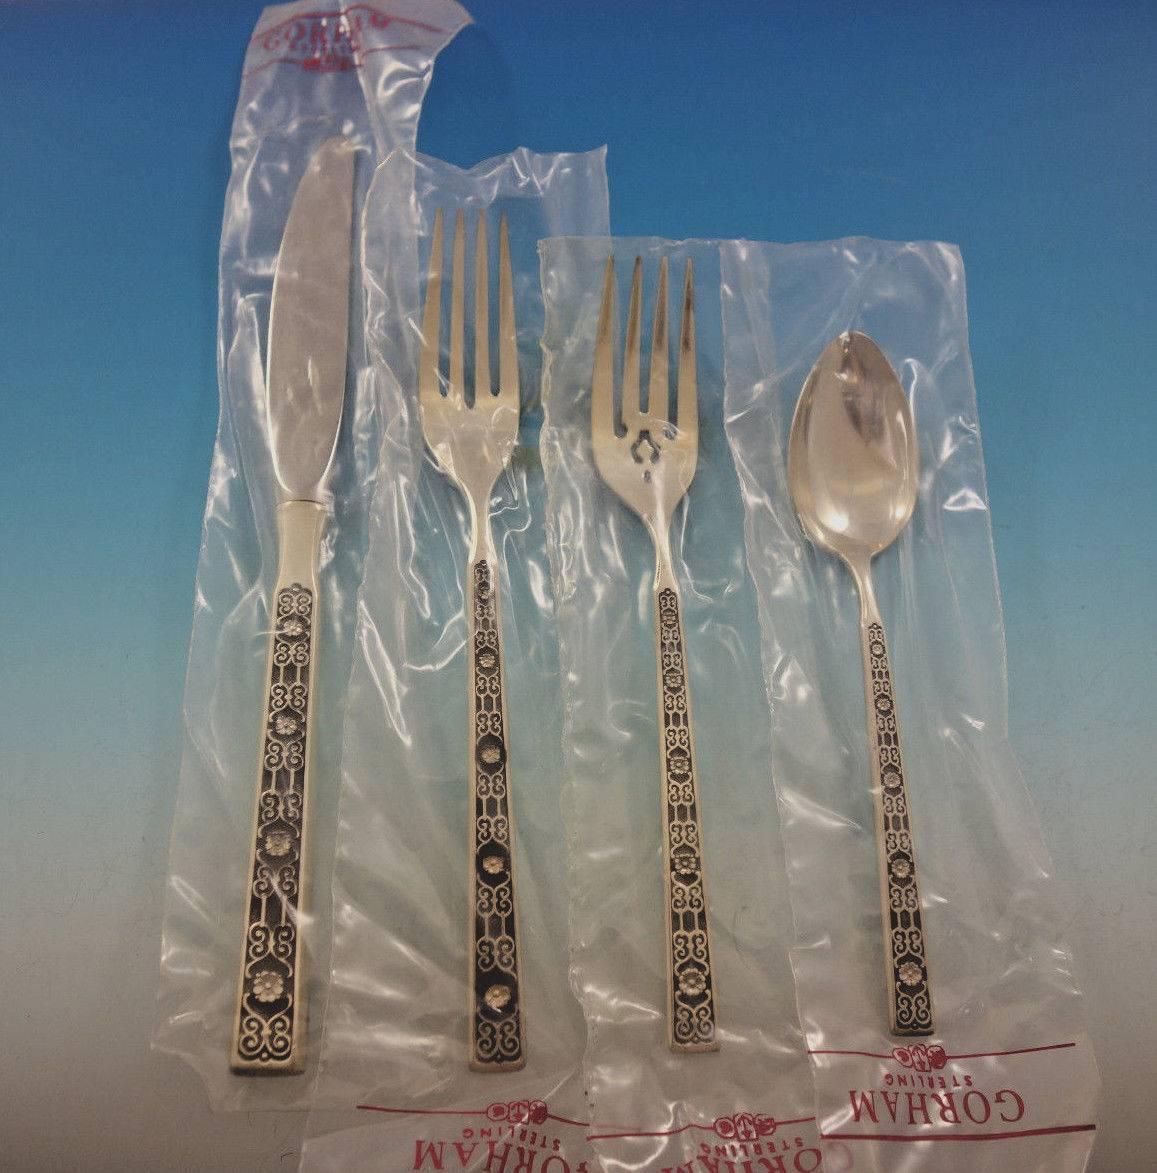 New, unused Spanish Tracery by Gorham sterling silver flatware set, 34 pieces. This set includes: 

Eight Place Knives, 9